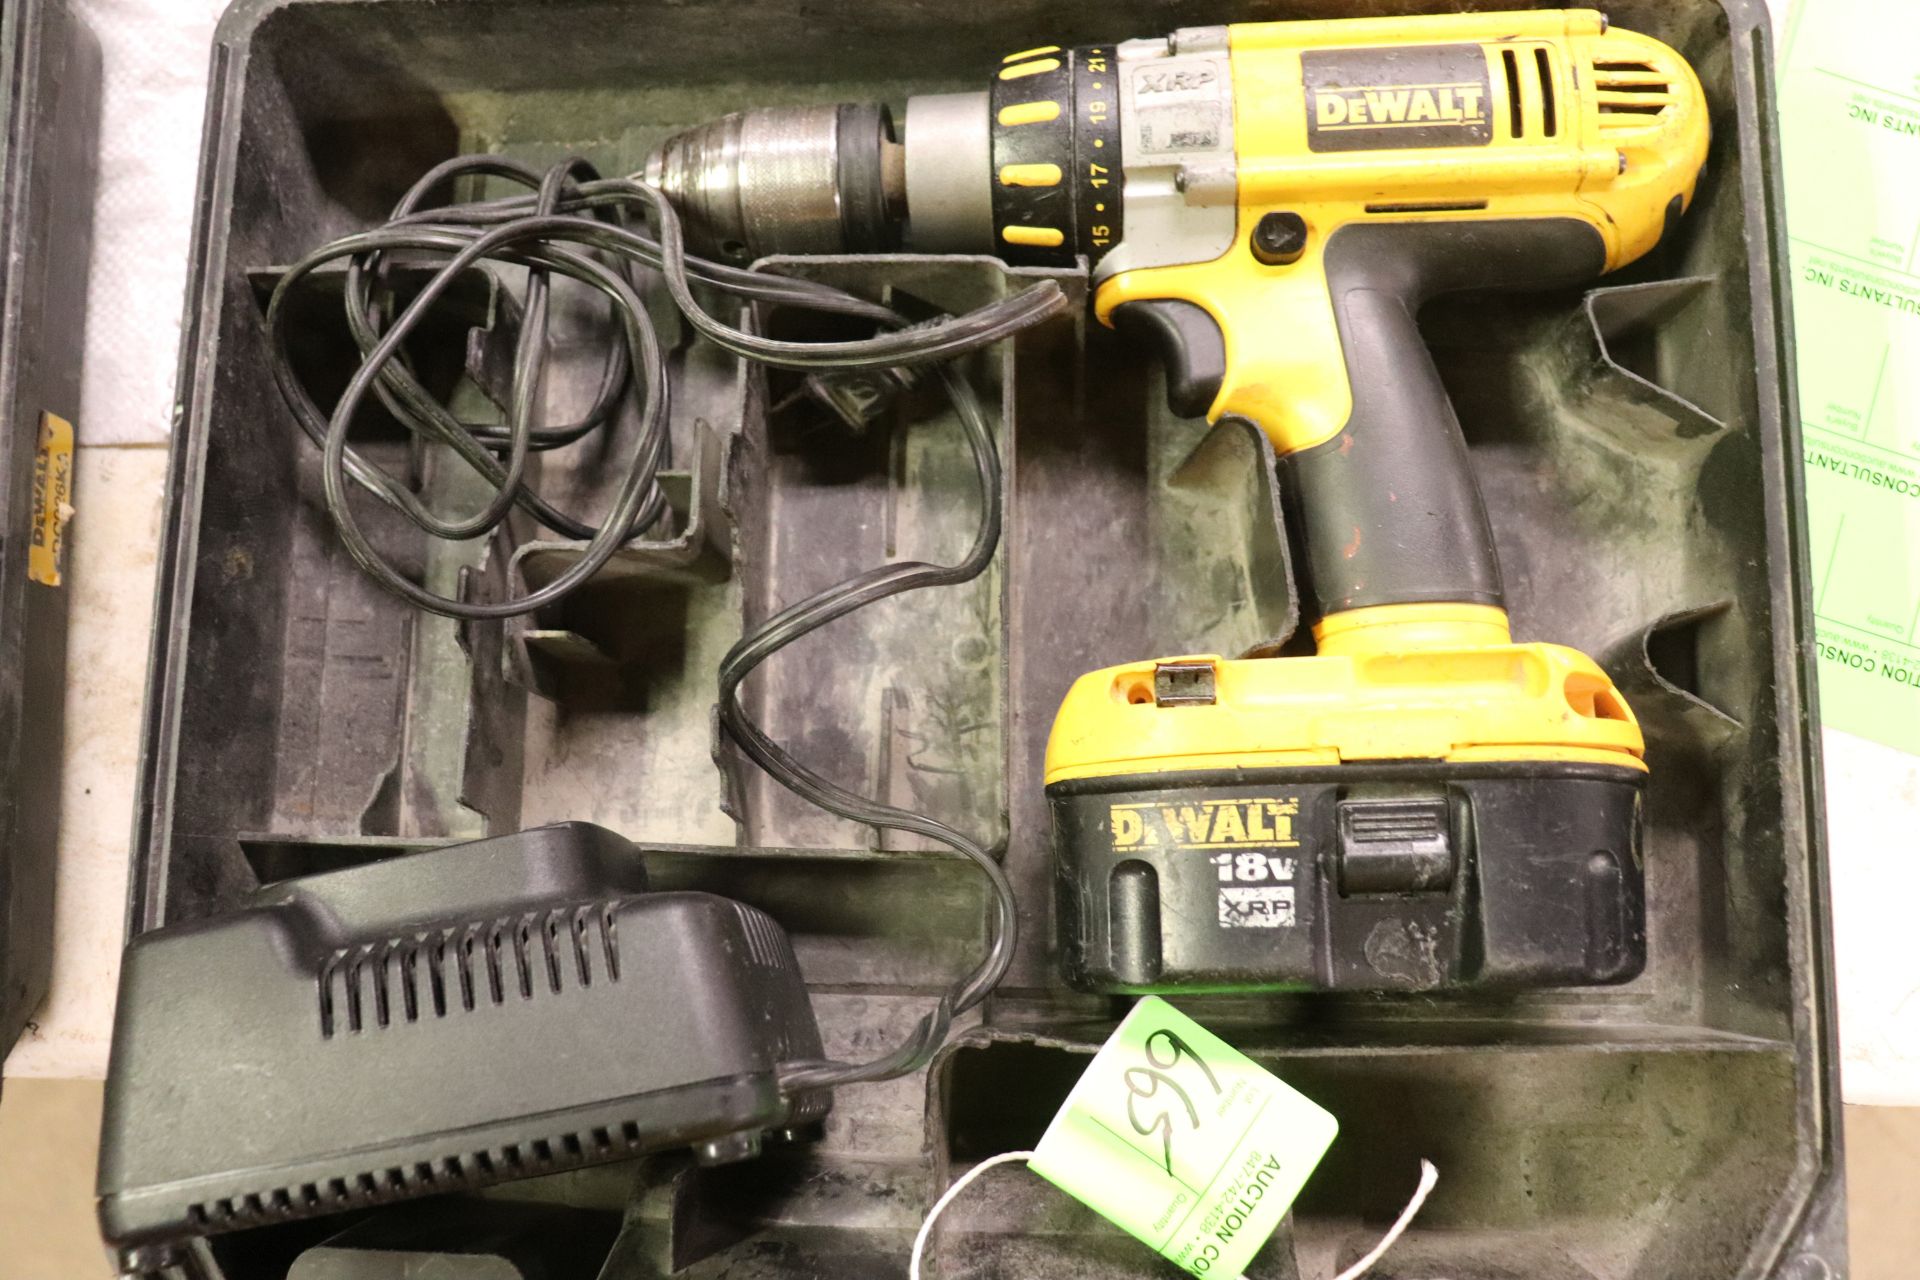 Dewalt 1/2" cordless hammer drill, DC925, with battery, charger and case